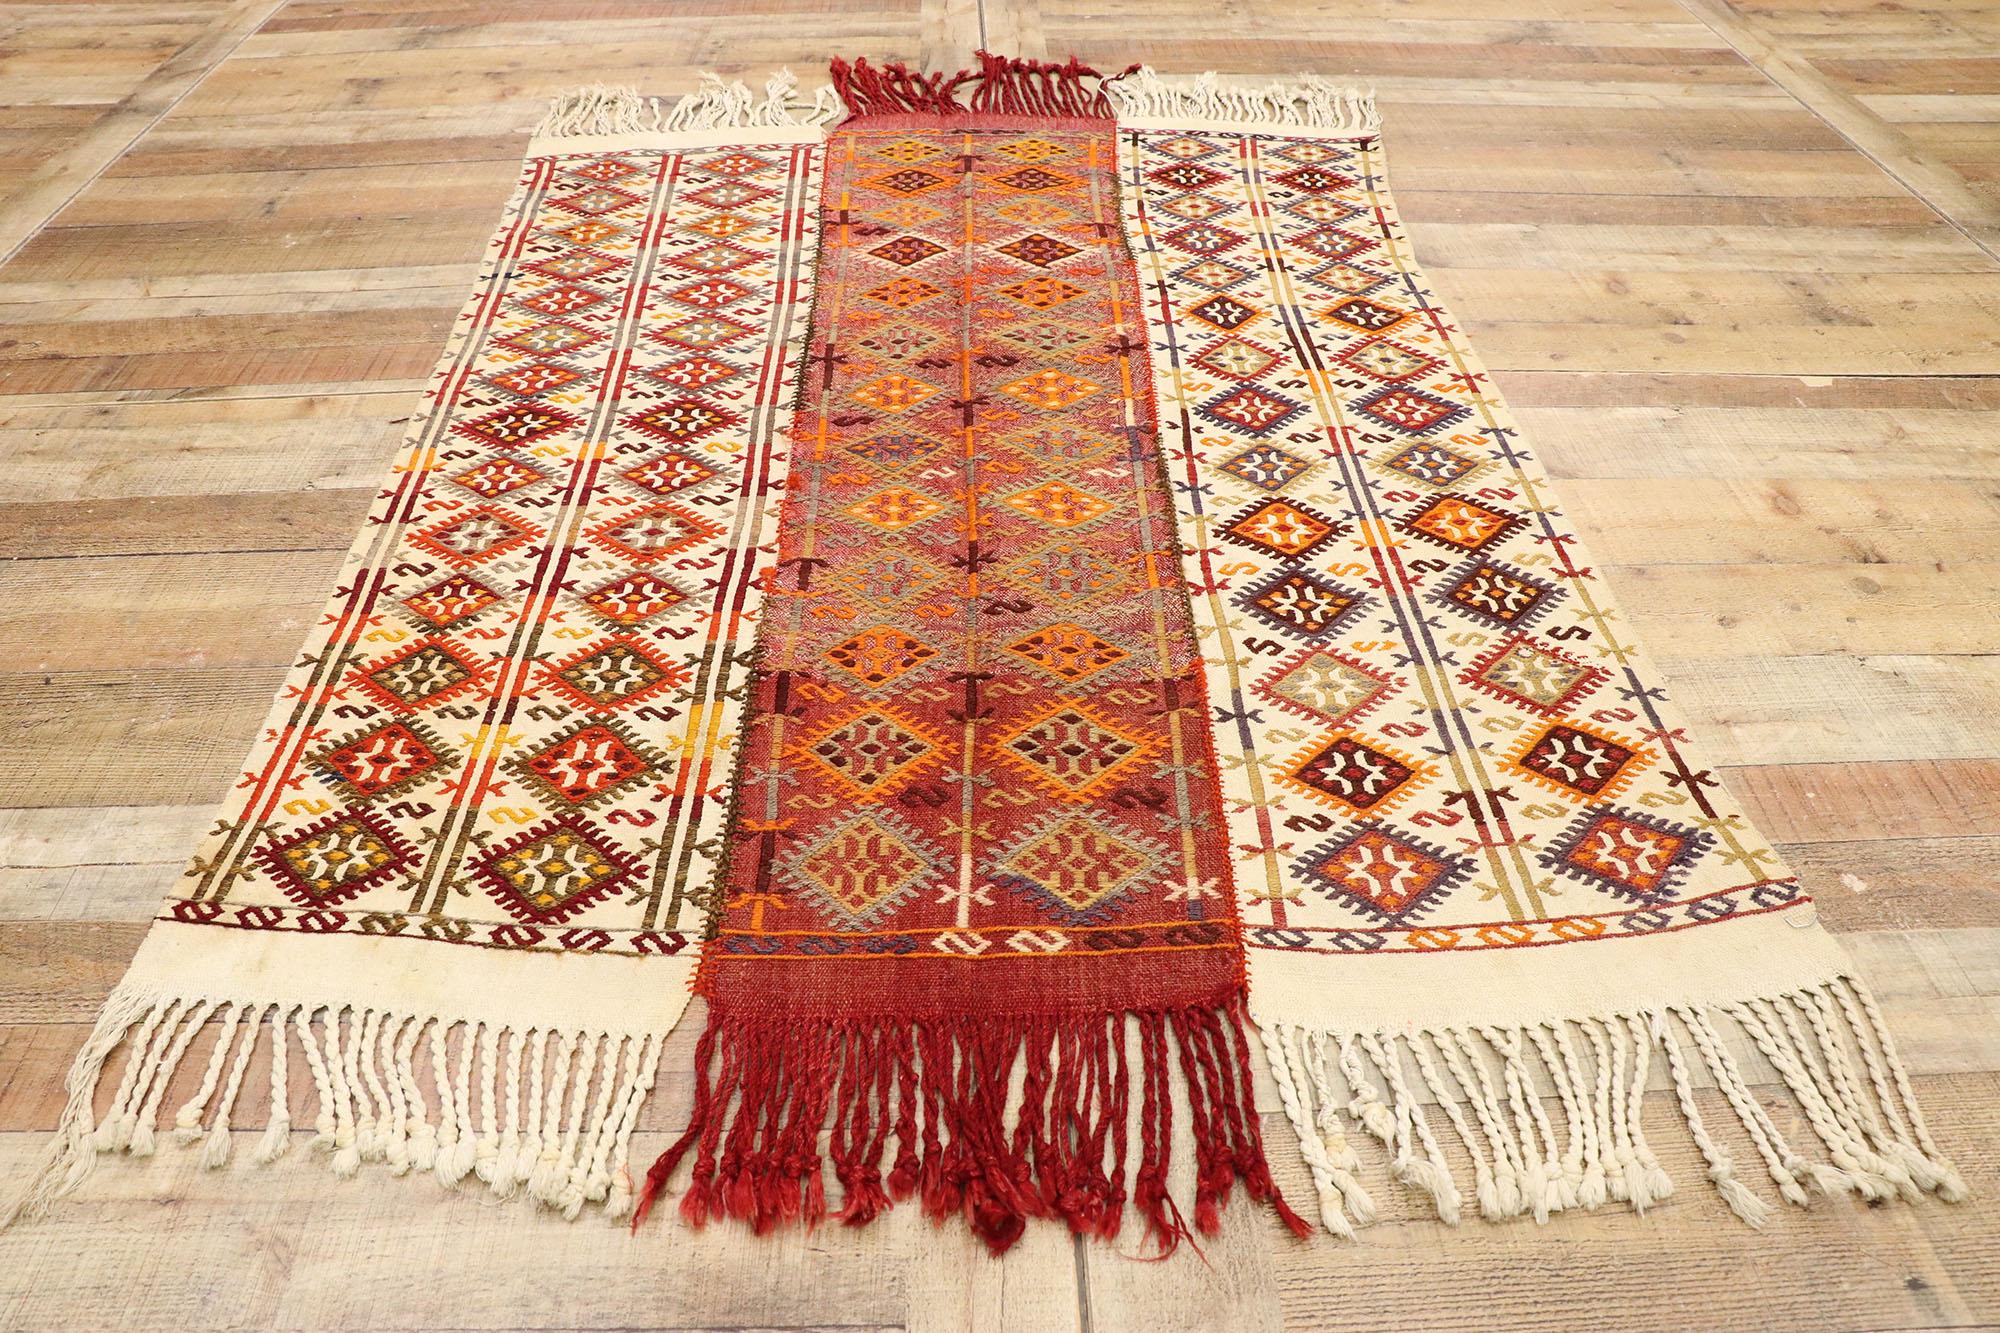 20th Century Vintage Turkish Kilim Rug with Pacific Northwest Tribal Boho Chic Style For Sale